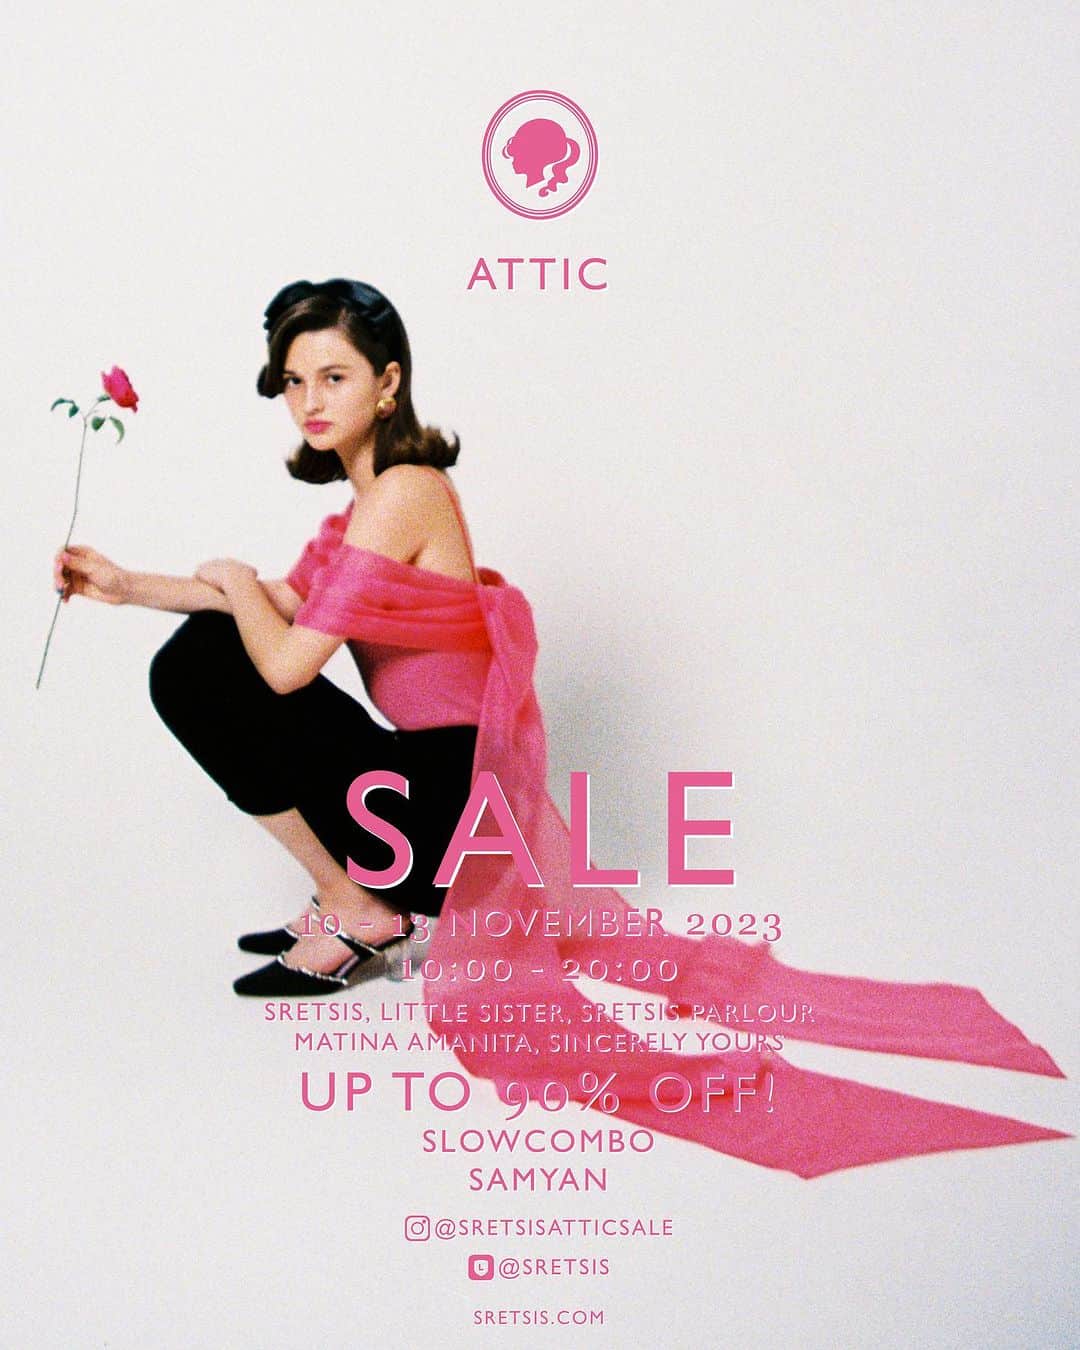 Sretsisのインスタグラム：「@sretsisatticsale 2023 is back with our biggest sale of the year! Shop beloved pieces that will be ‘Forever Yours’ from all brands within Sretsis’ Universe at up to 90% off along with never before seen samples not to be missed!   Exclusive to this Attic Sale, we are pleased to introduce Sretsis Founder’s personal vintage collection from their time in New York, that helped to shape their aesthetics and Sretsis’ style. Shop at “New York 1999” room and discover pre-loved treasures.   Sale continues at Line Official Account @ Sretsis (with @ sign) from 11:00 - 16:00 and Sretsis.com! #SretsisAtticSale2023」